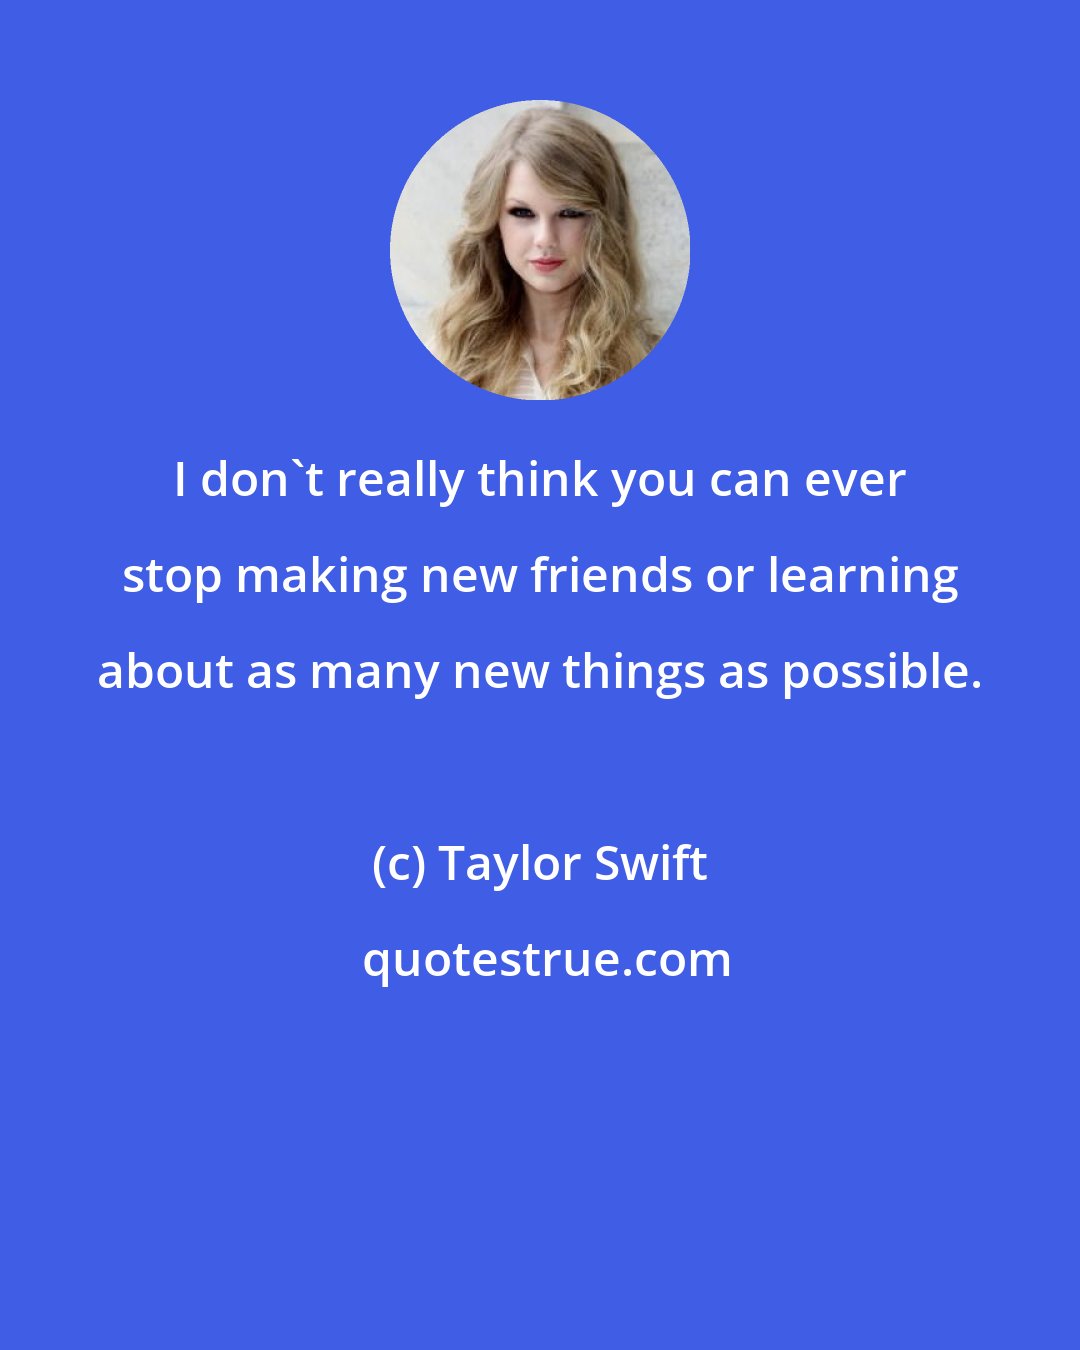 Taylor Swift: I don't really think you can ever stop making new friends or learning about as many new things as possible.